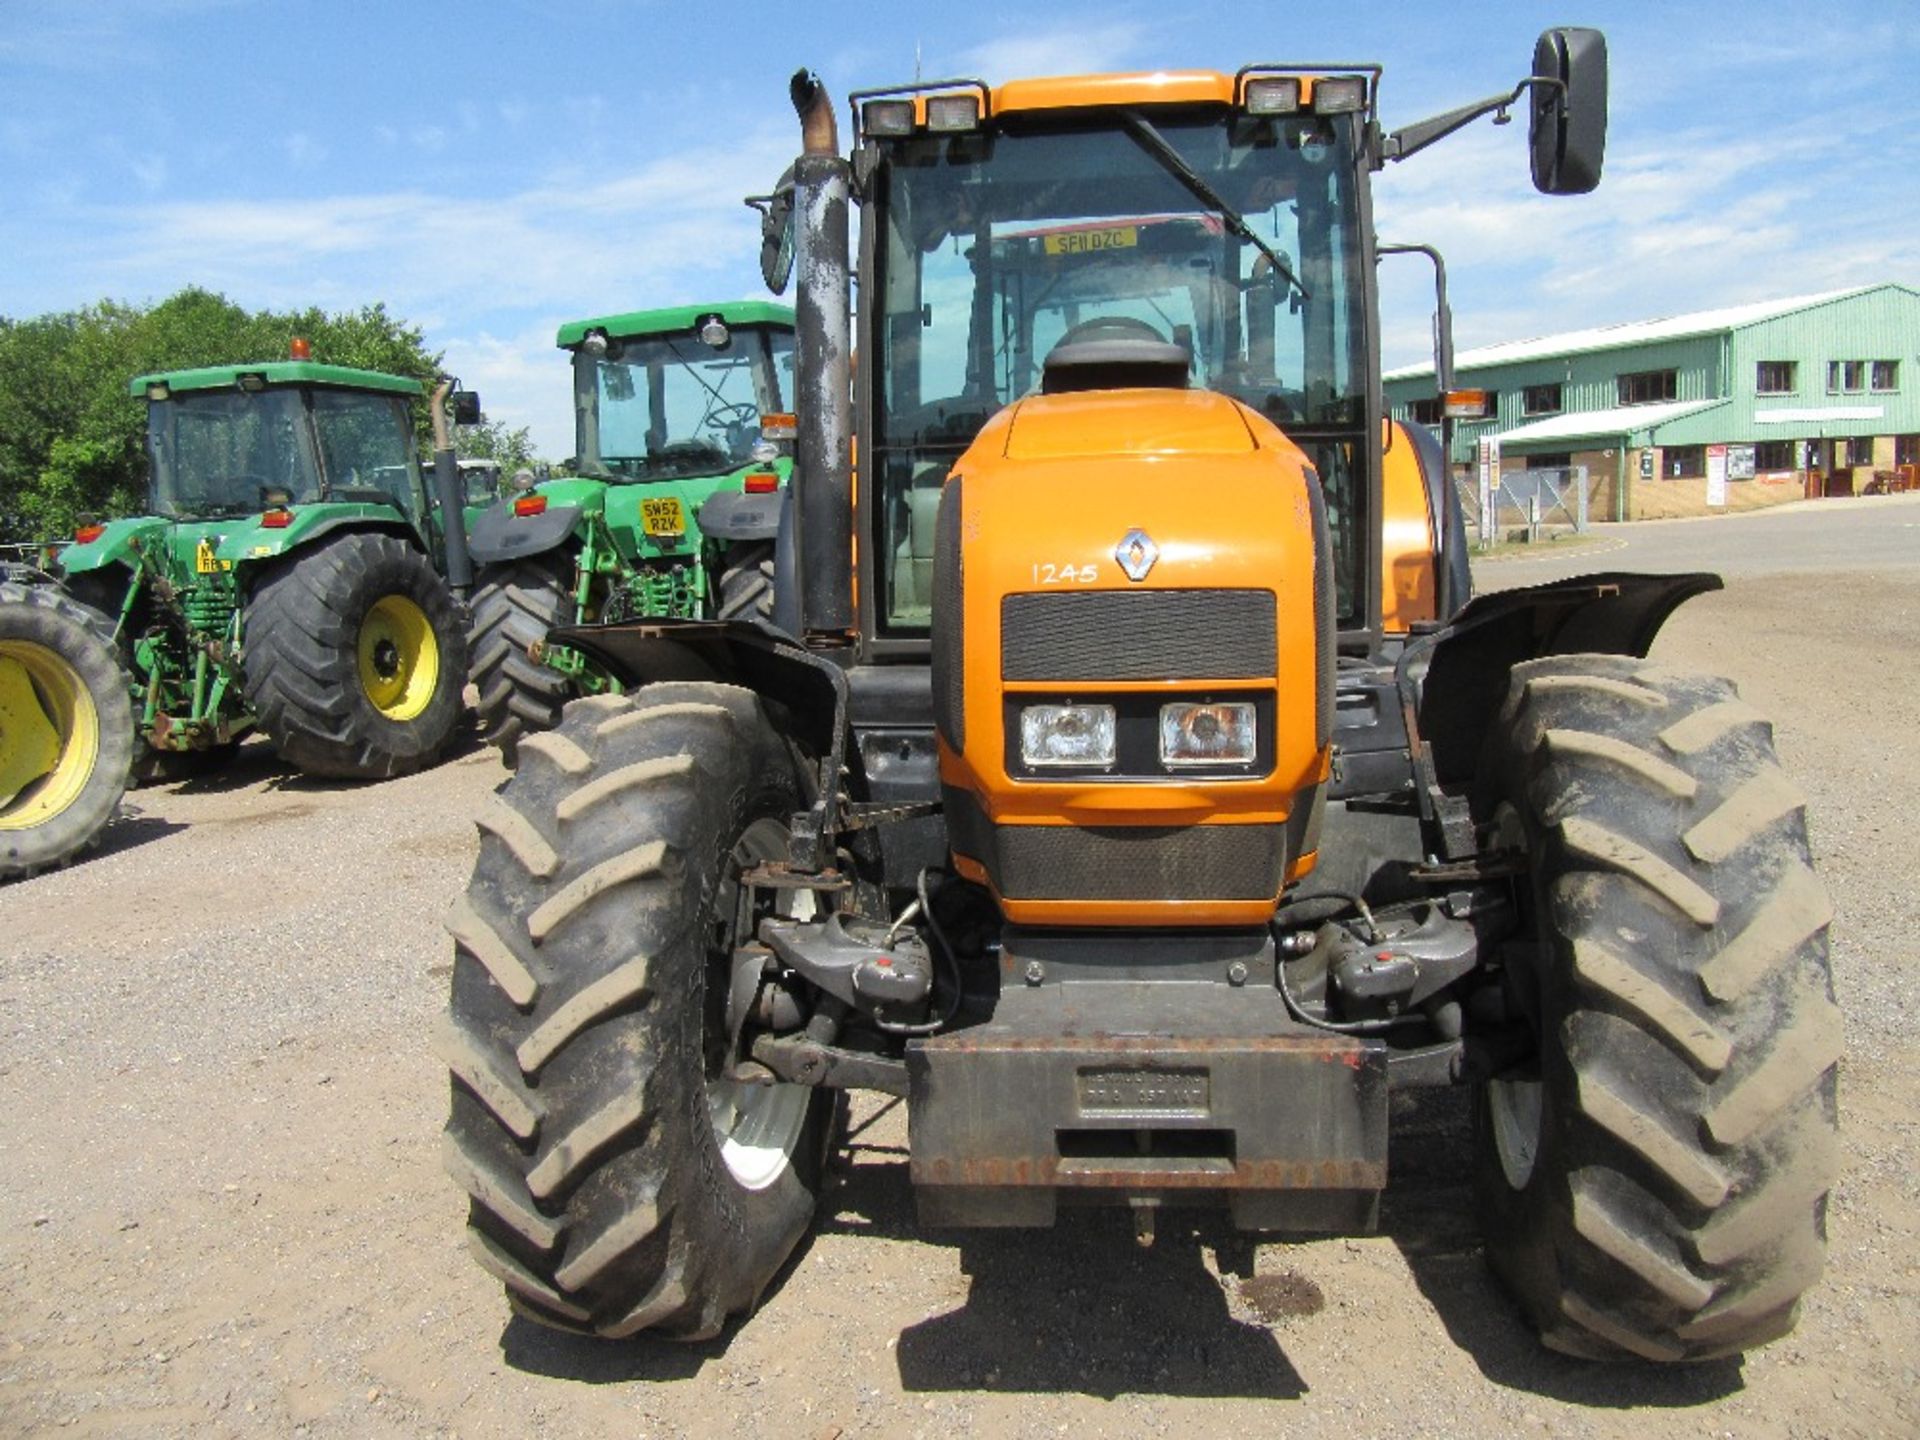 2001 Renault Ares 825 4wd Tractor. V5 will be supplied. Reg No AY51 FKU Ser No 4320378 - Image 2 of 14